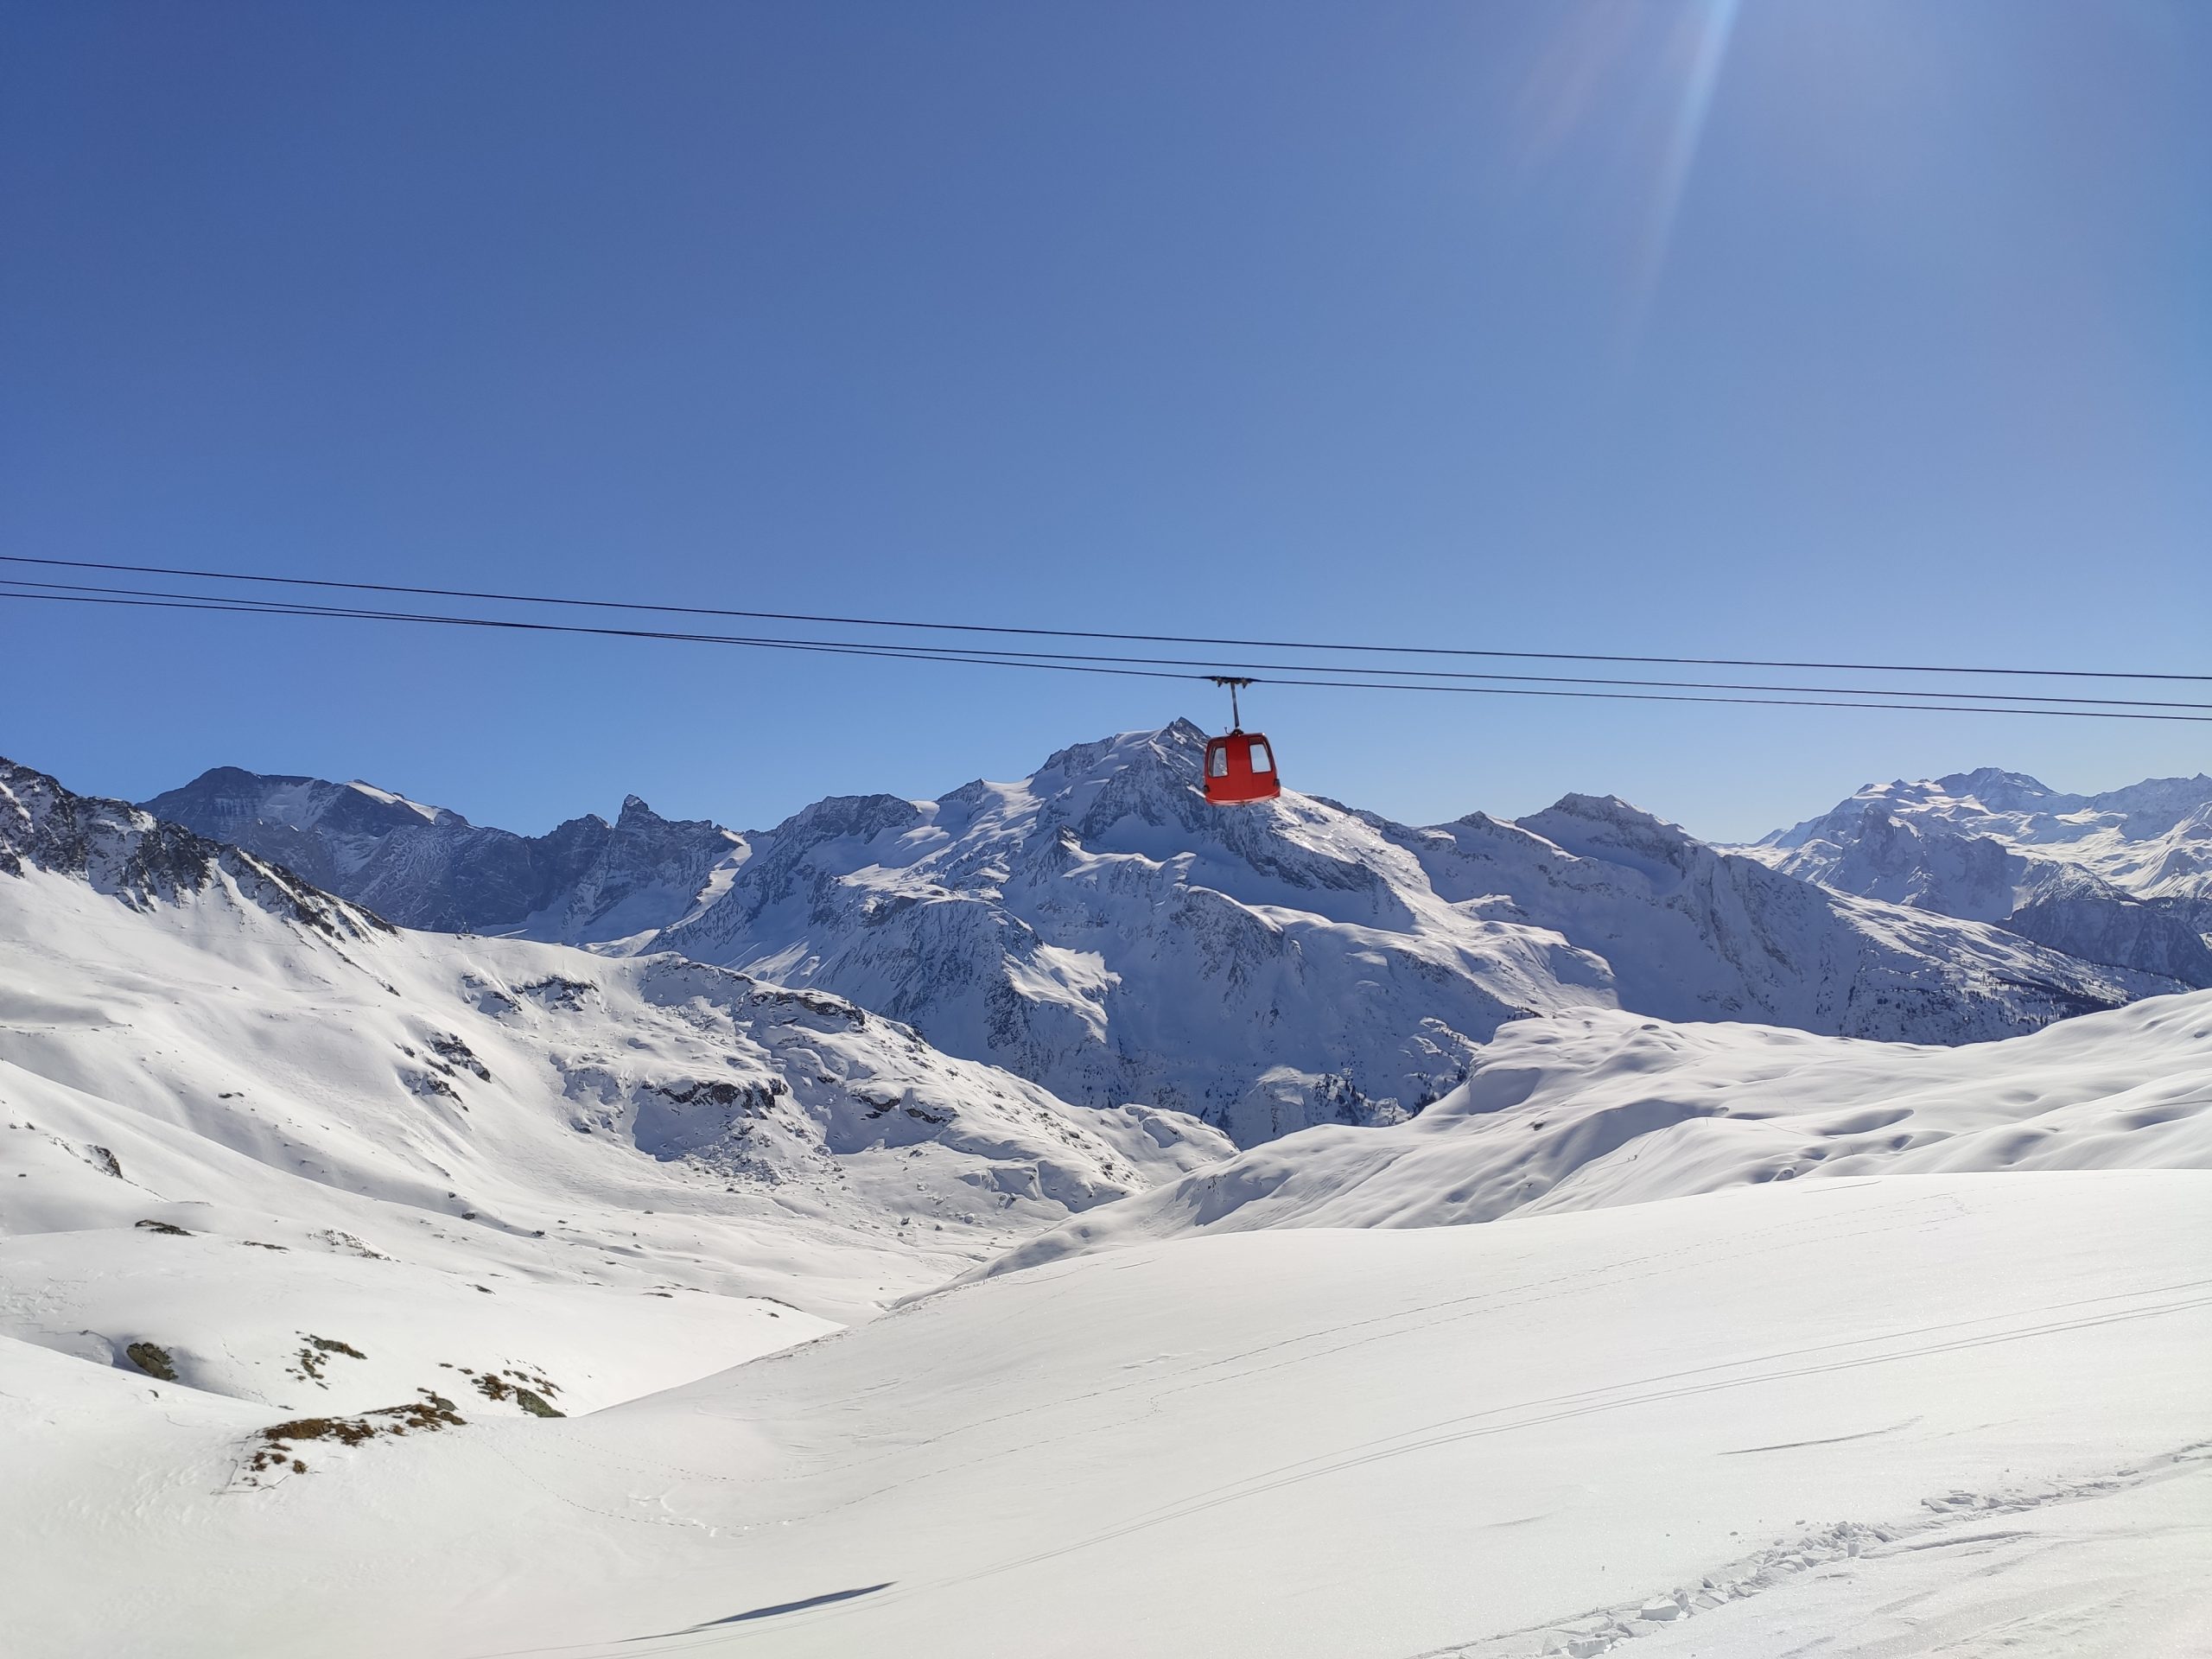 In February-March, enjoy a discounted ski stay in Champagny-en-Vanoise with the Residence Les Edelweiss !